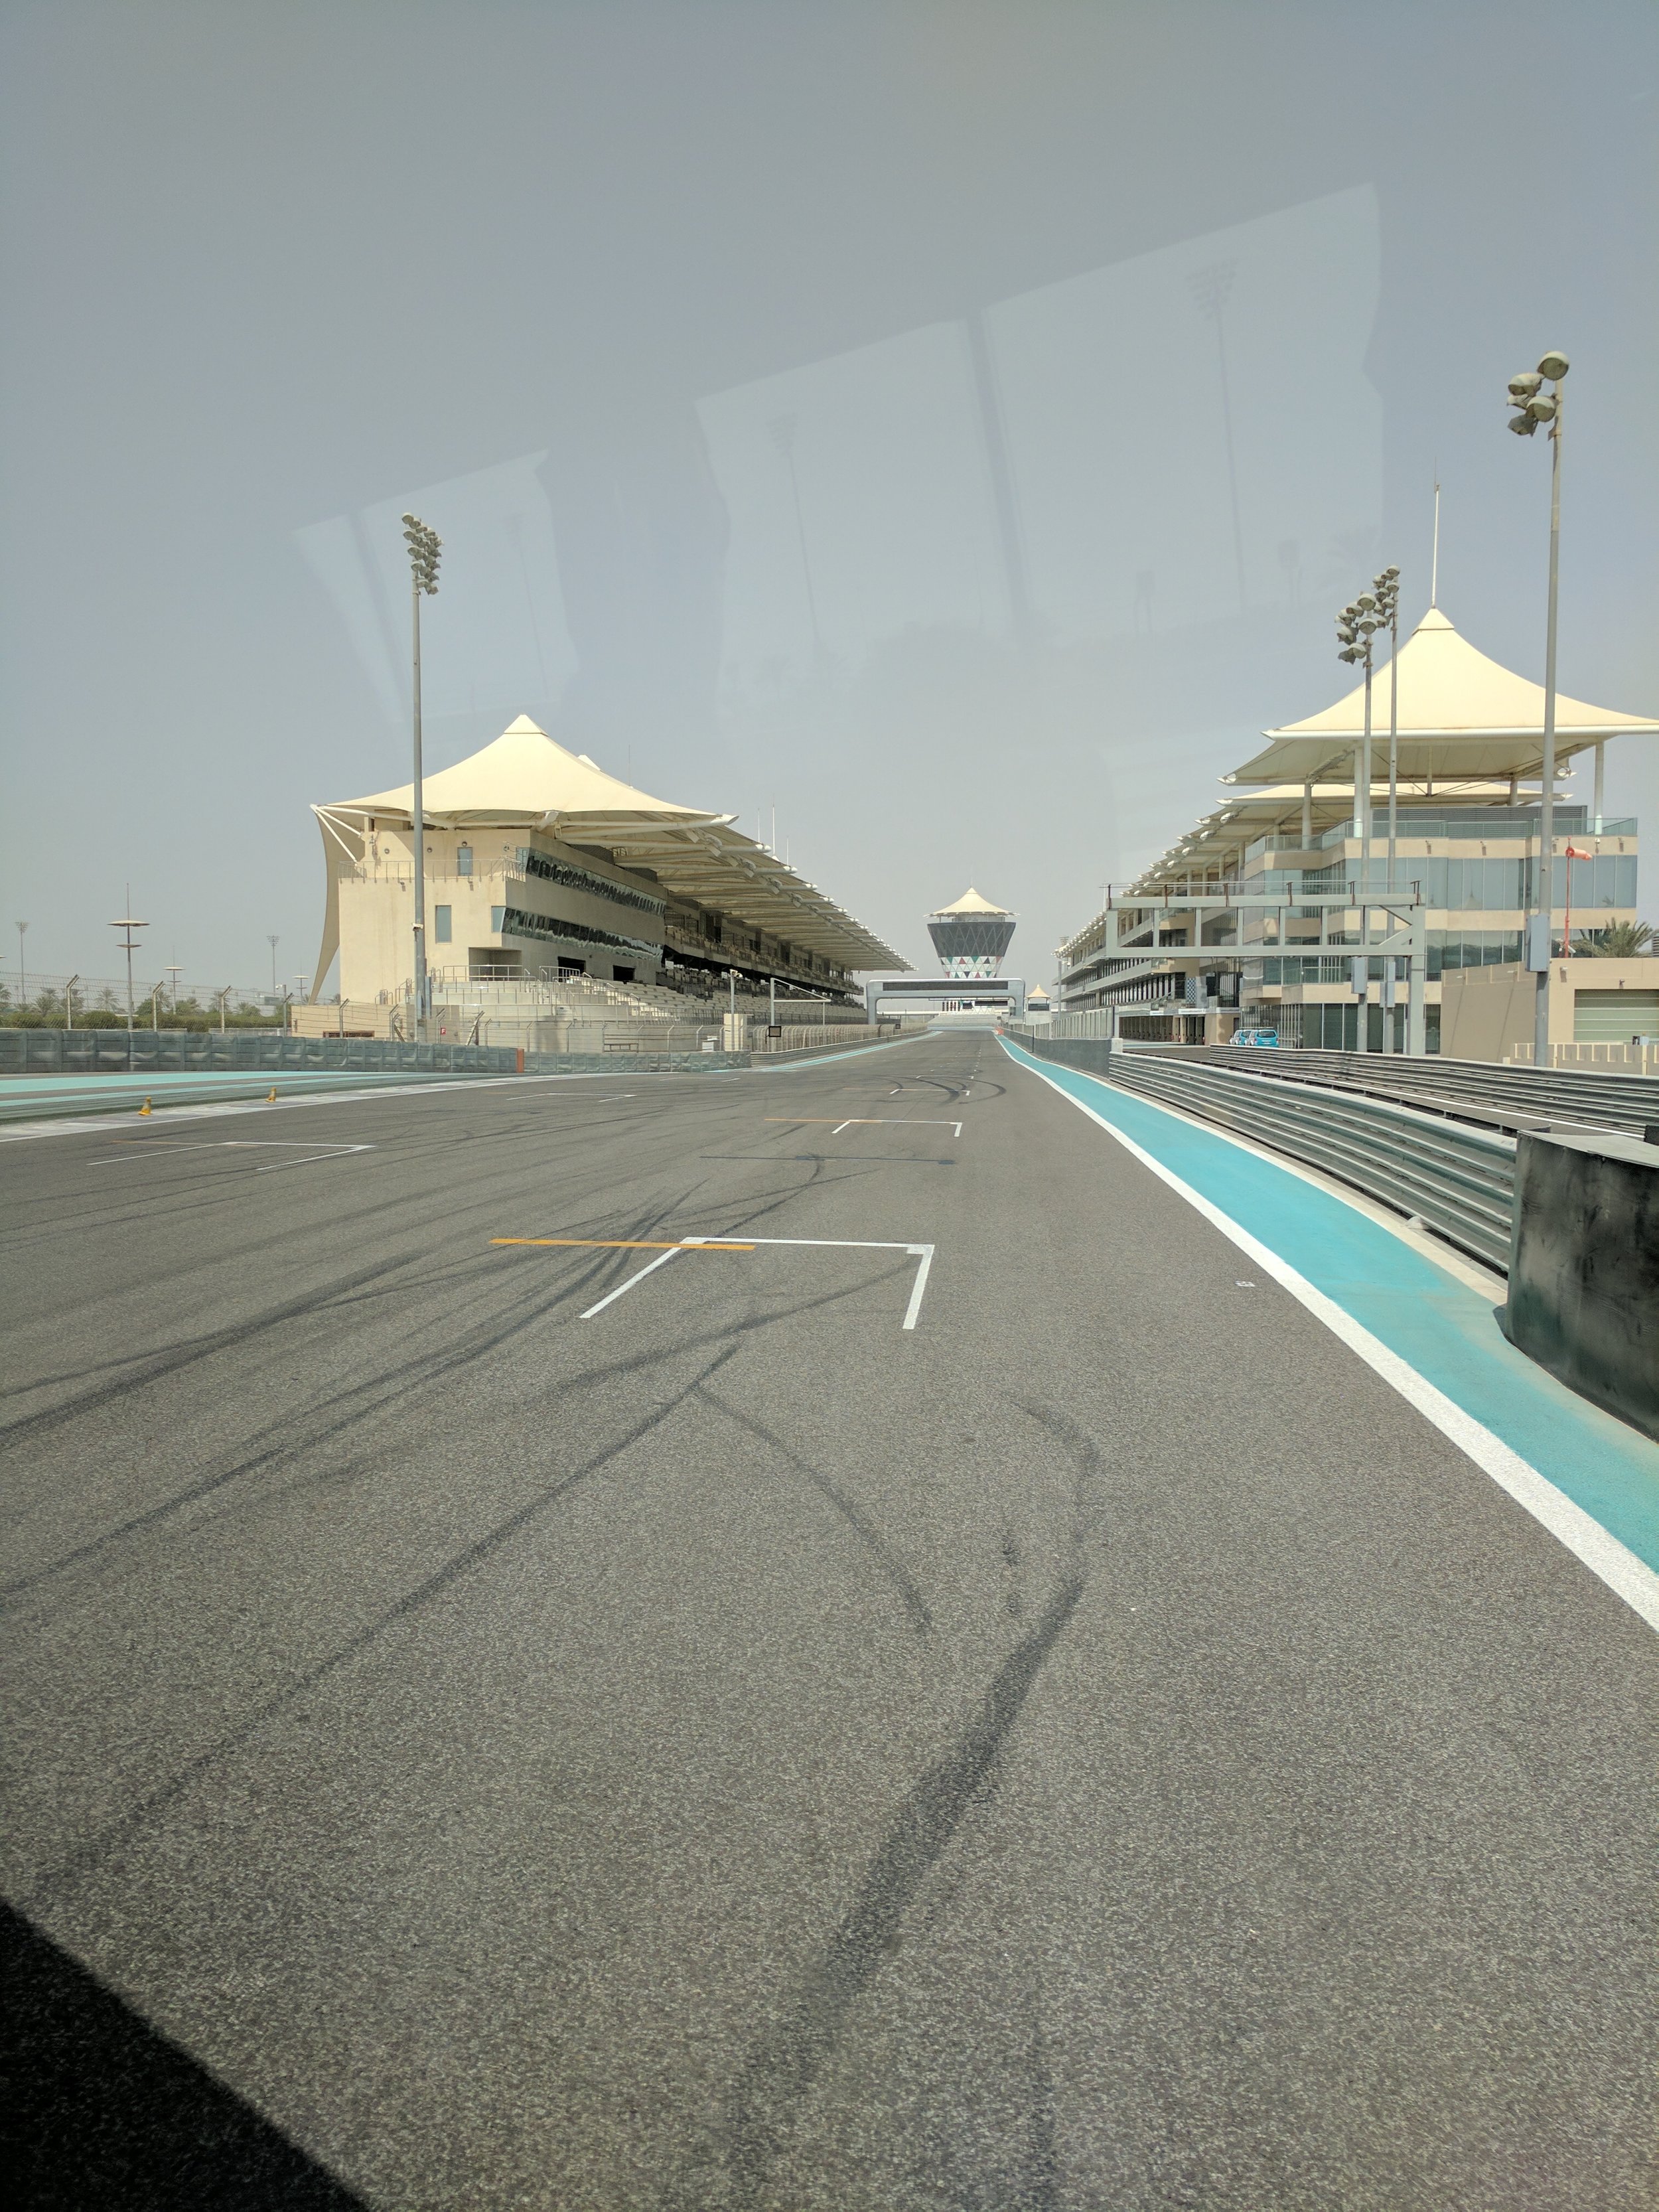 The Yas Marina Circuit finish line in sight